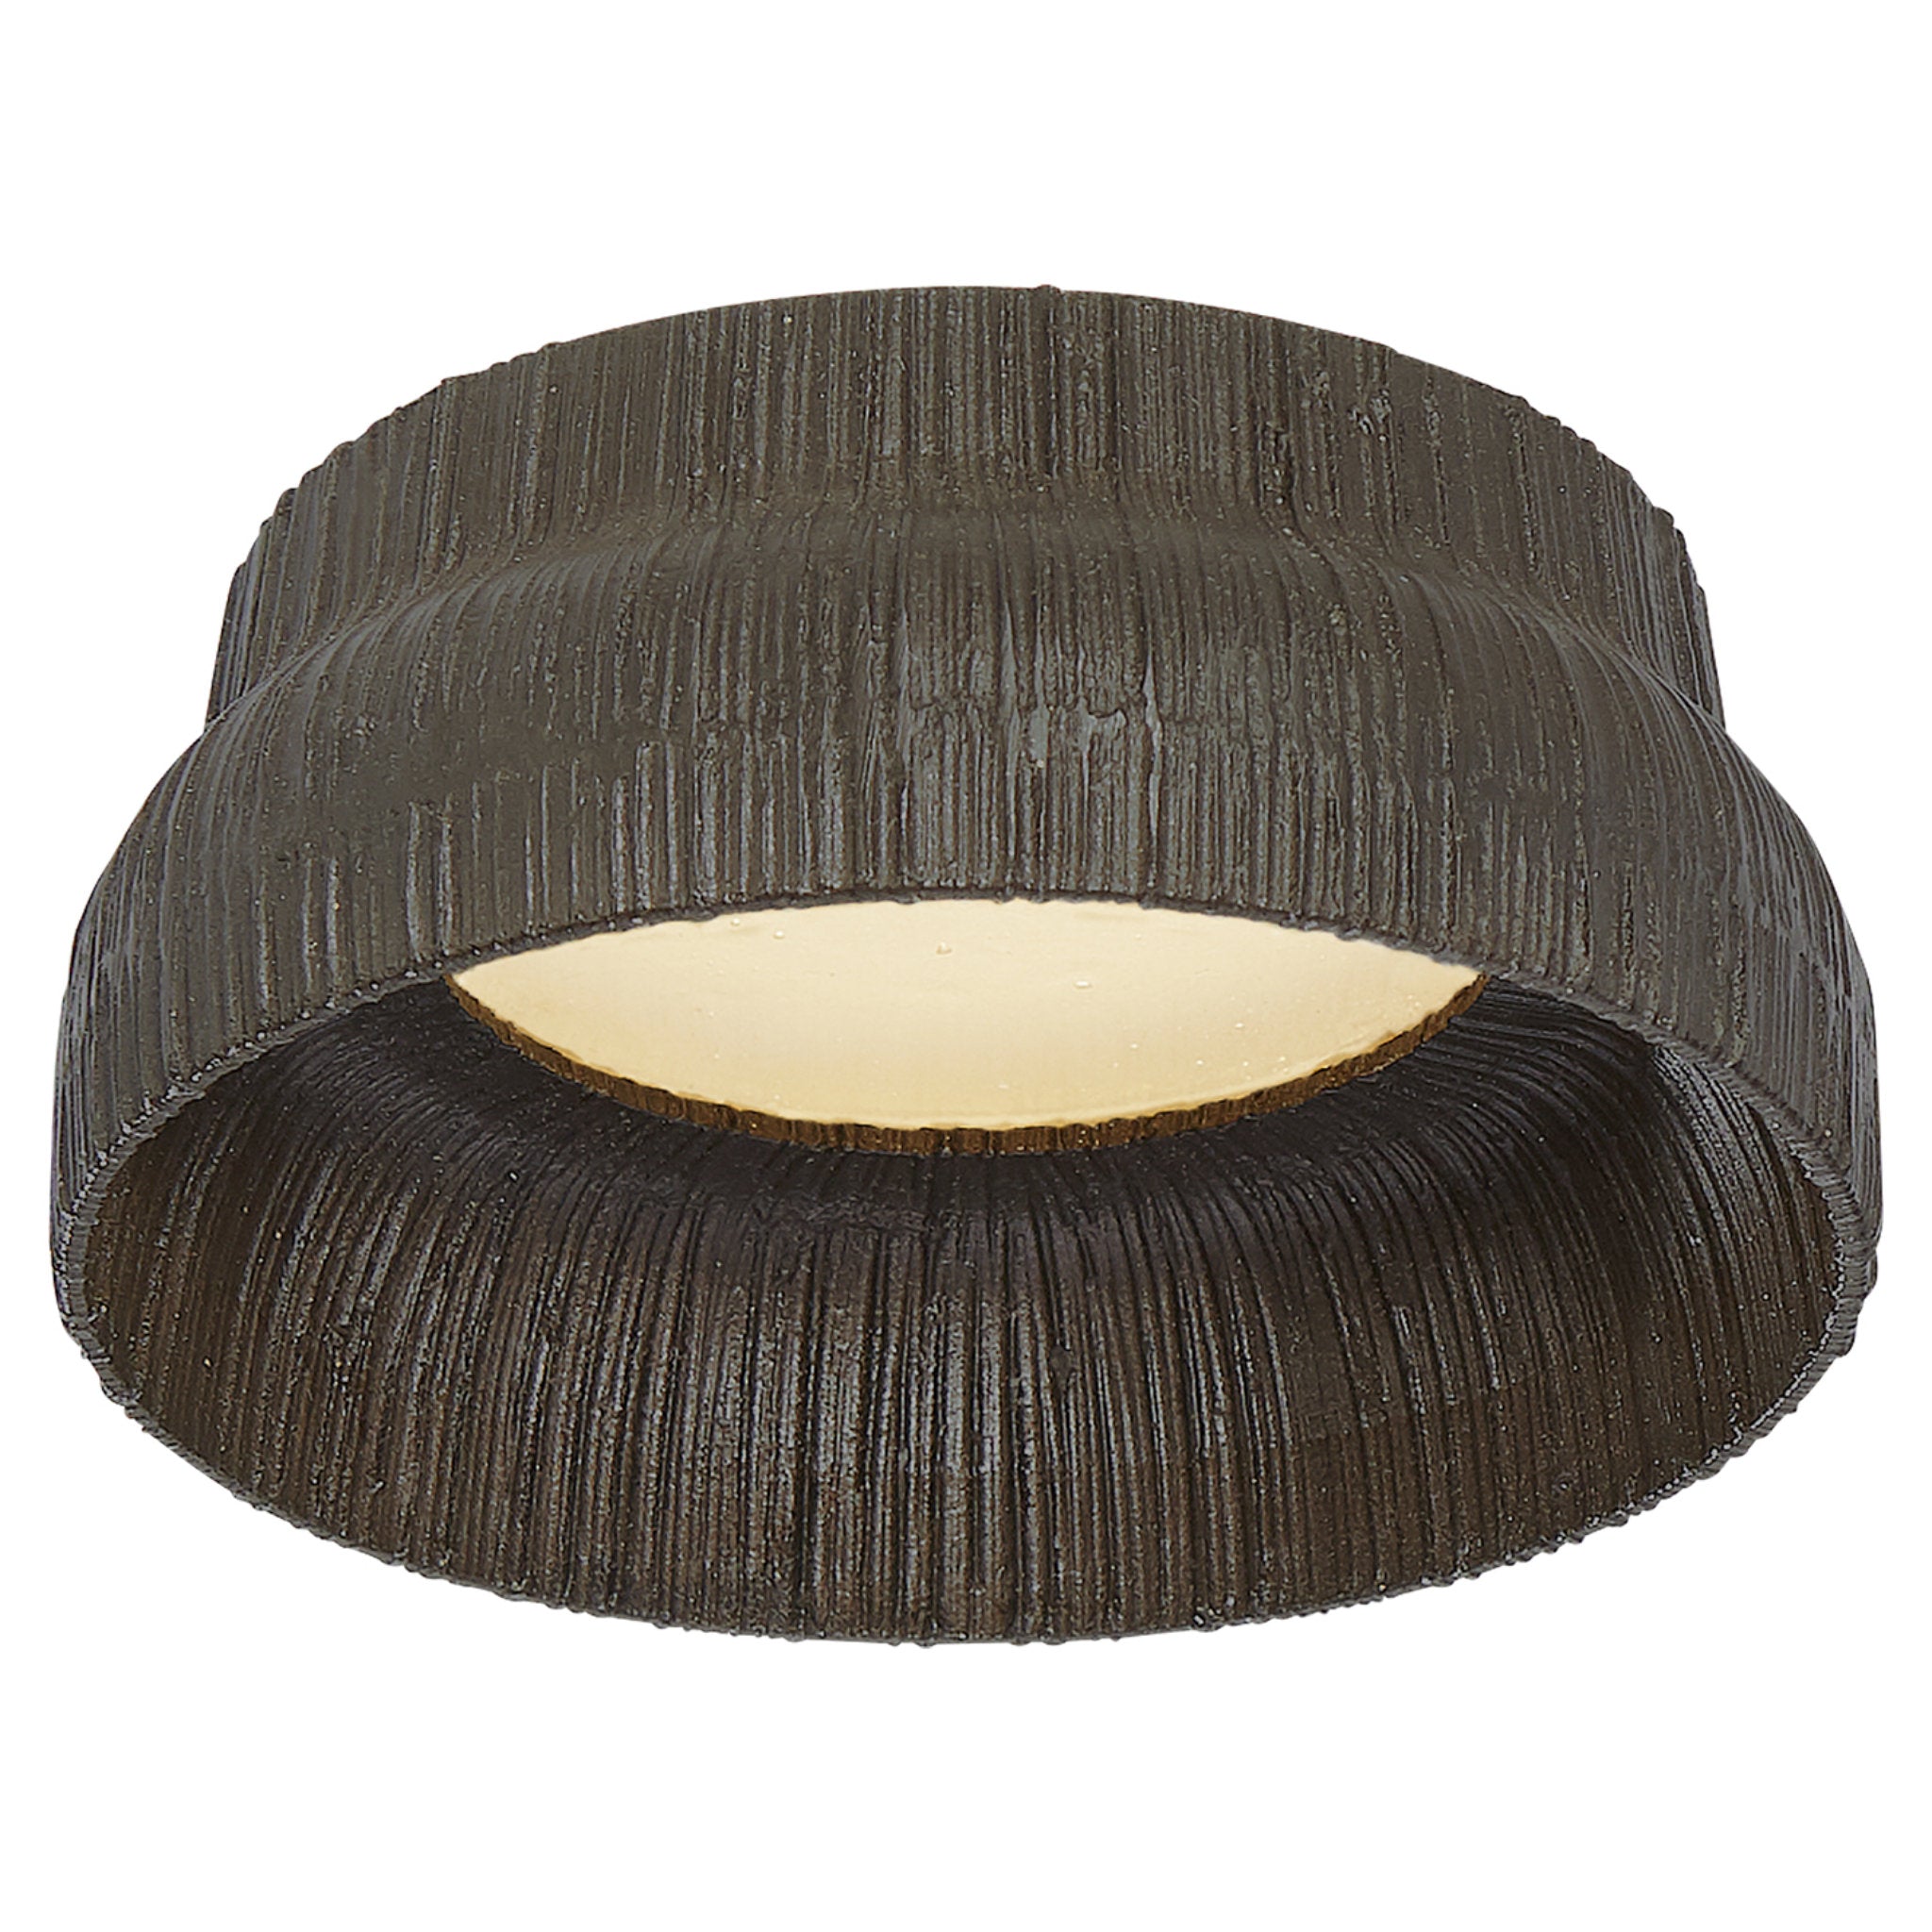 Kelly Wearstler Utopia 5" Solitaire Flush Mount in Aged Iron with Fractured Glass Trim